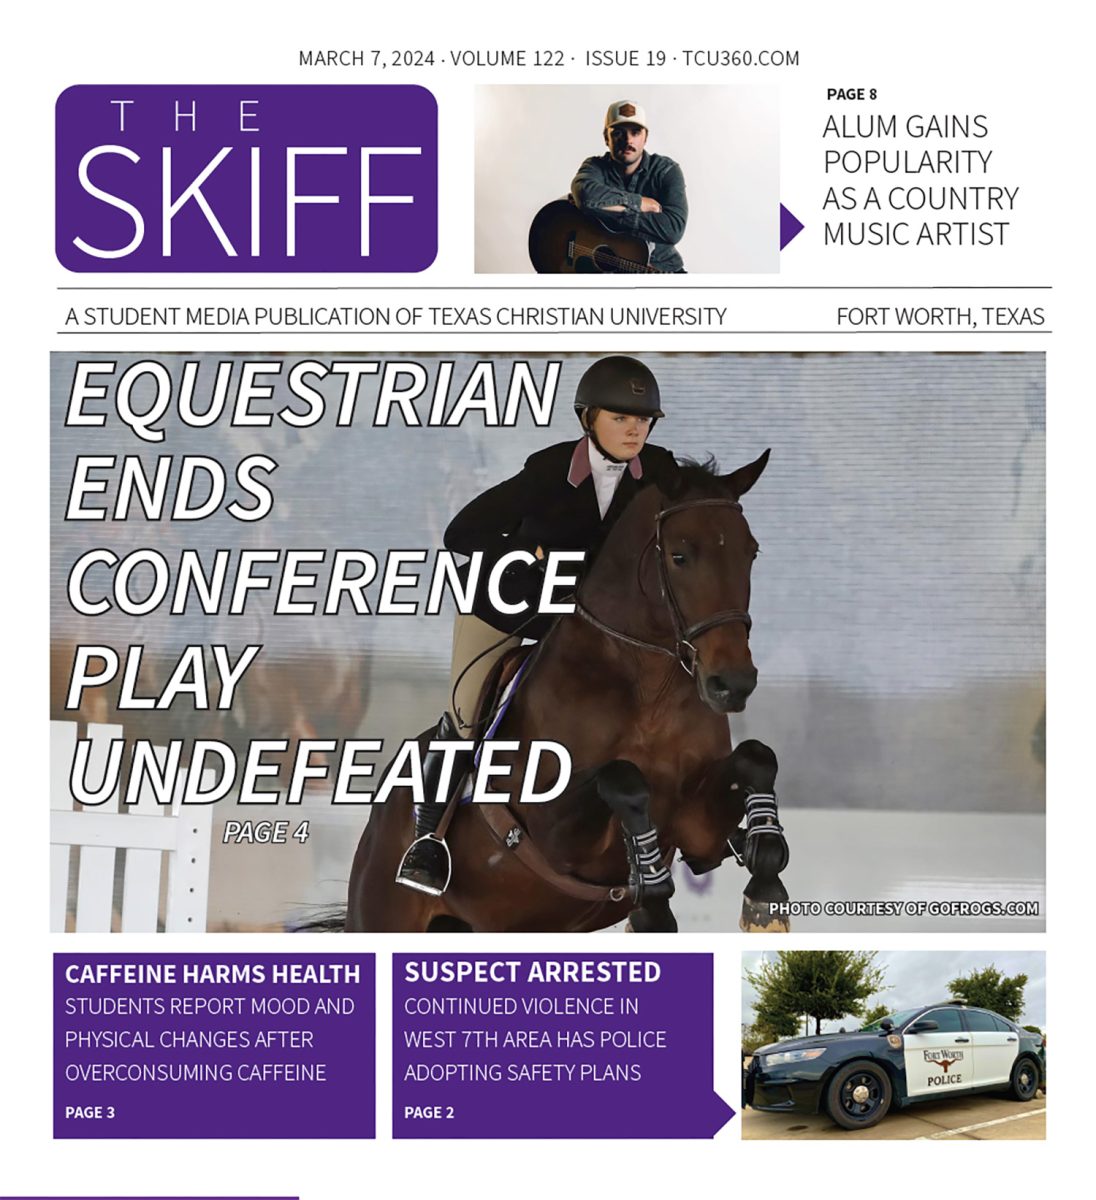 The Skiff: Equestrian ends conference play undefeated